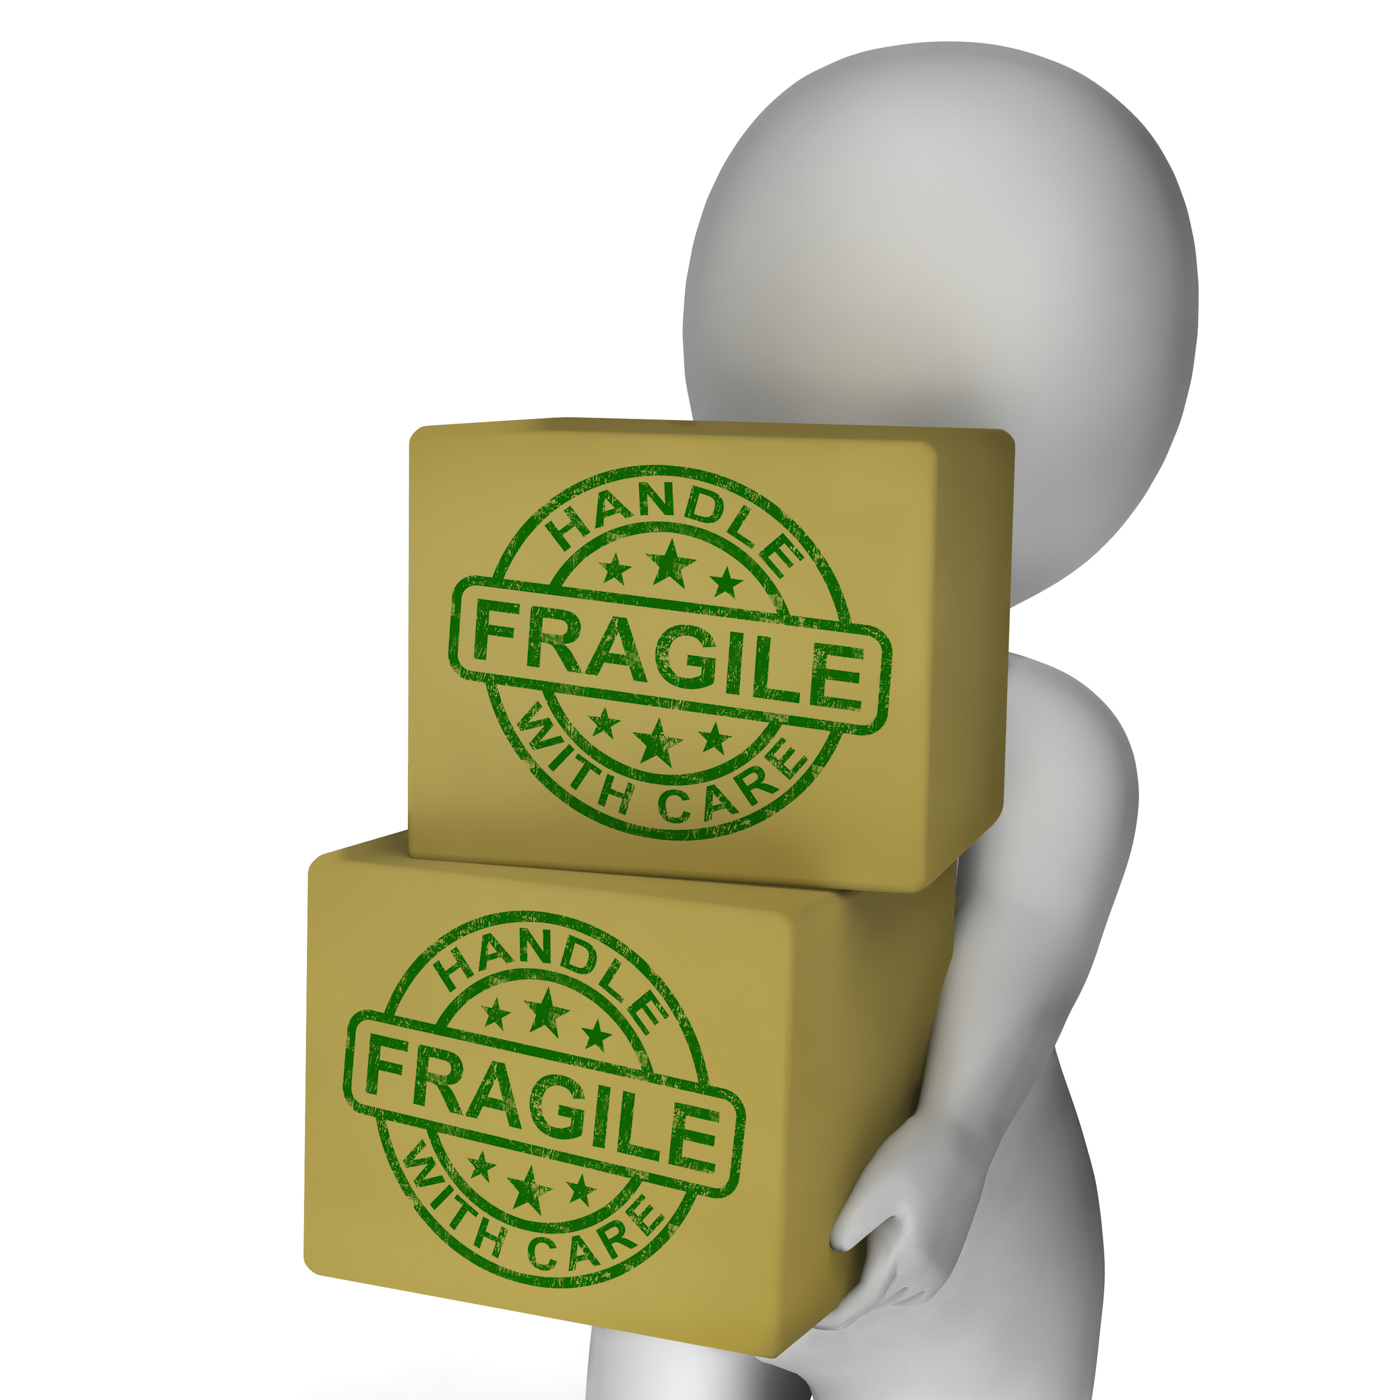 Fragile stamp on boxes showing breakable or delicate products photo